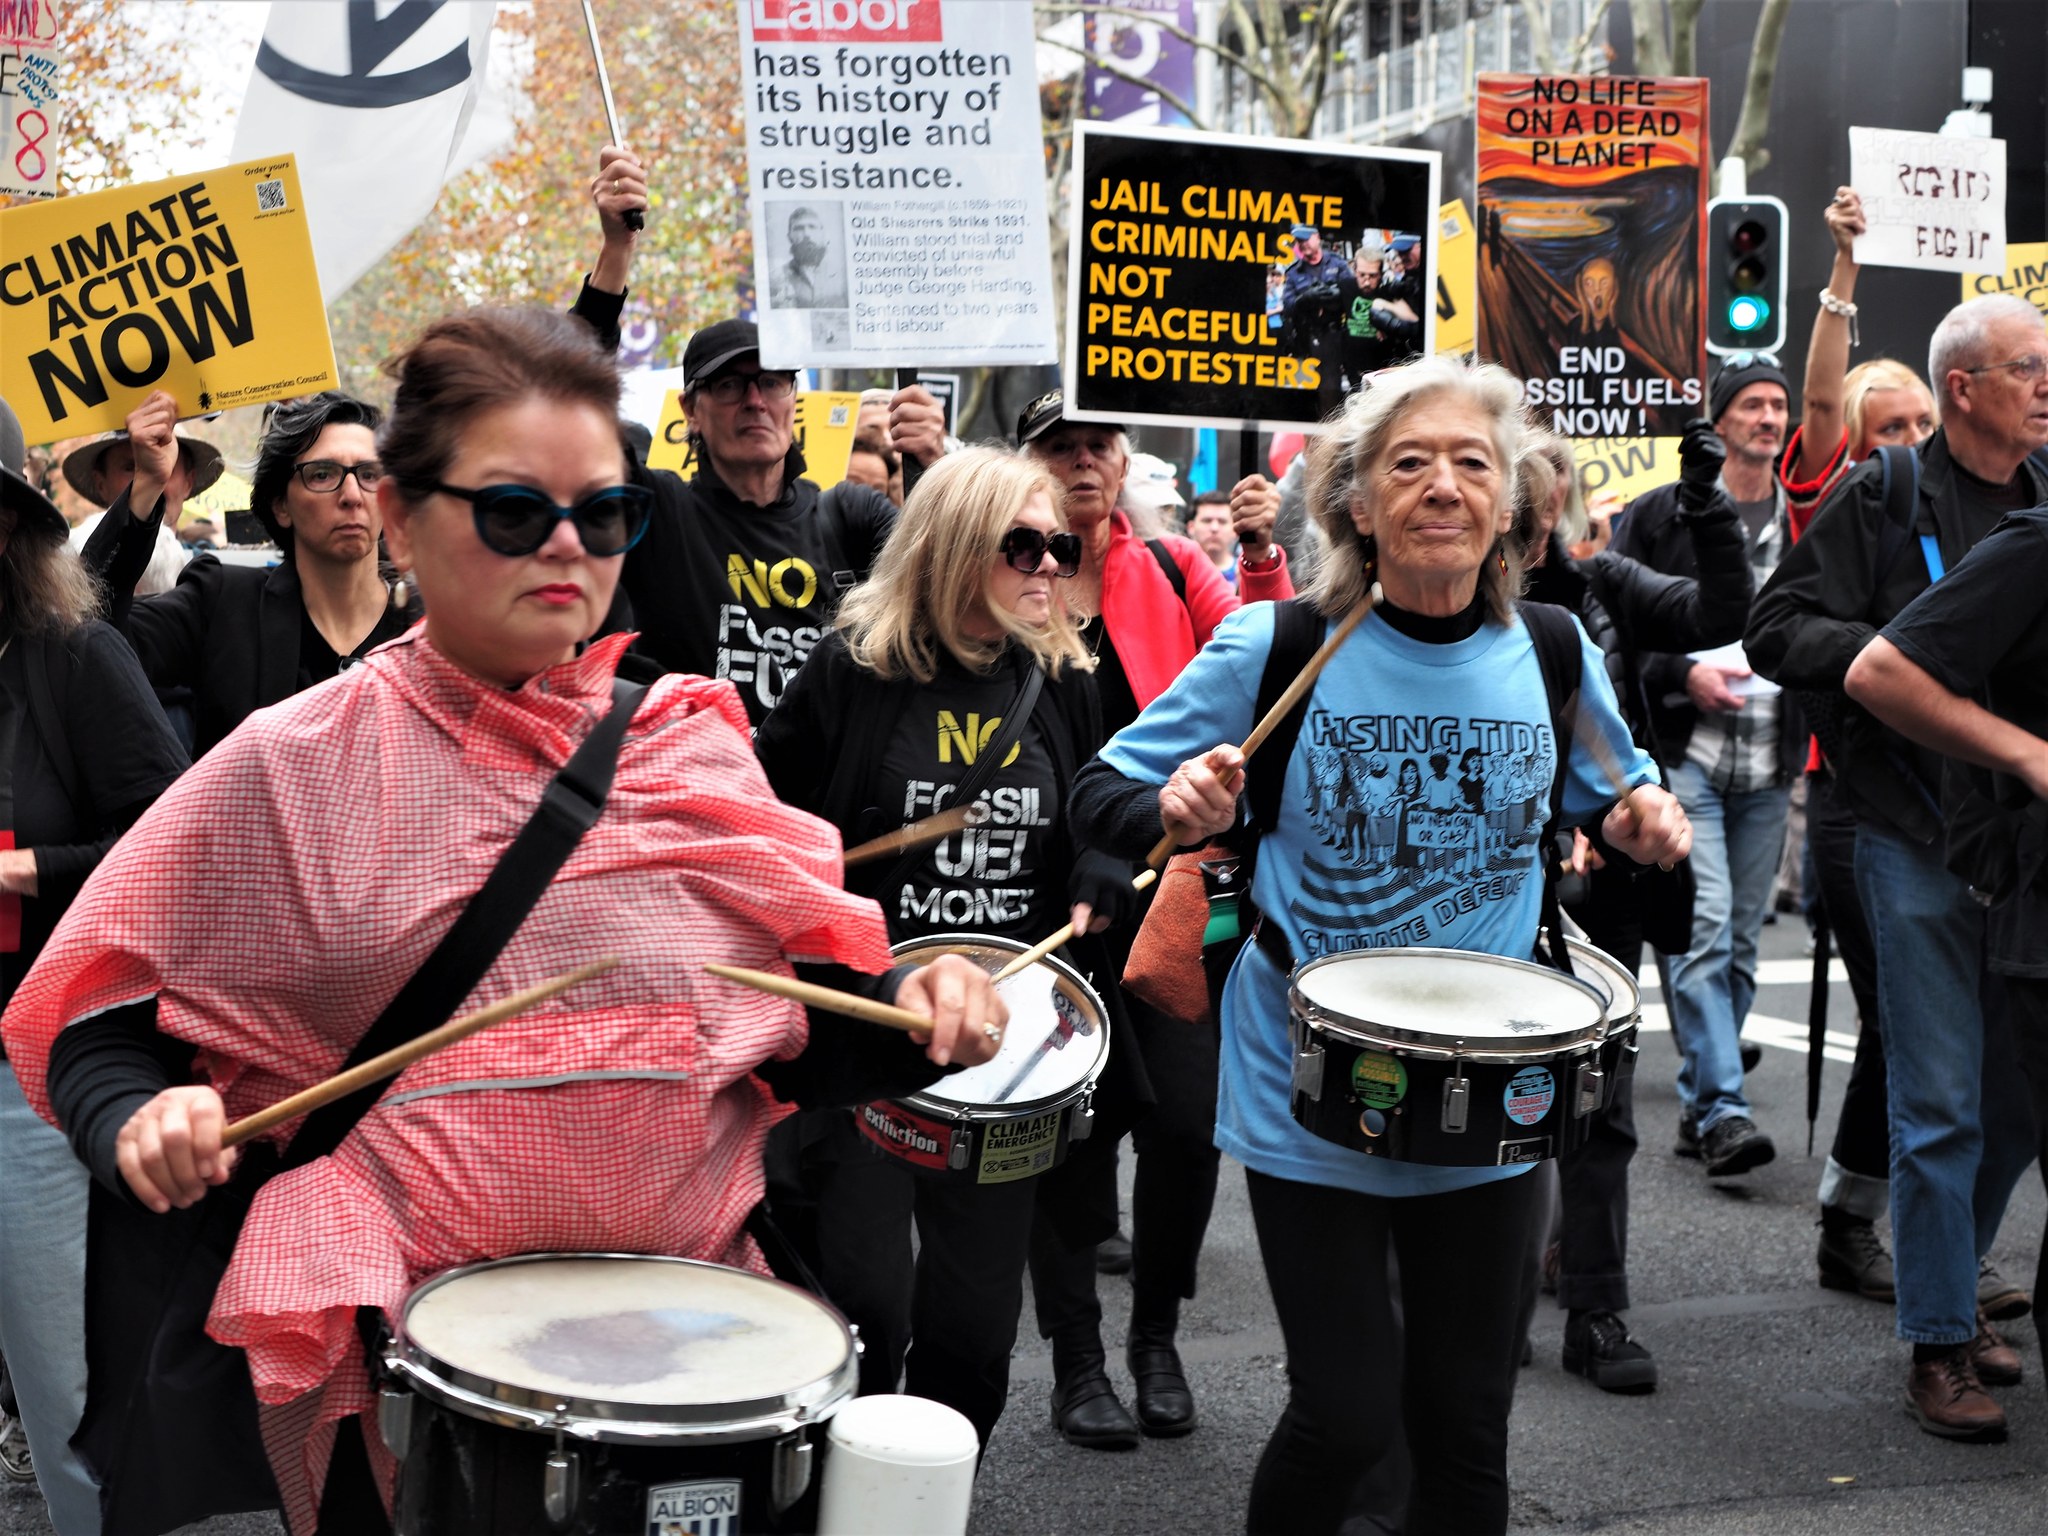 Extinction Rebellion drummers joined the lively rally. Photo: Peter Boyle